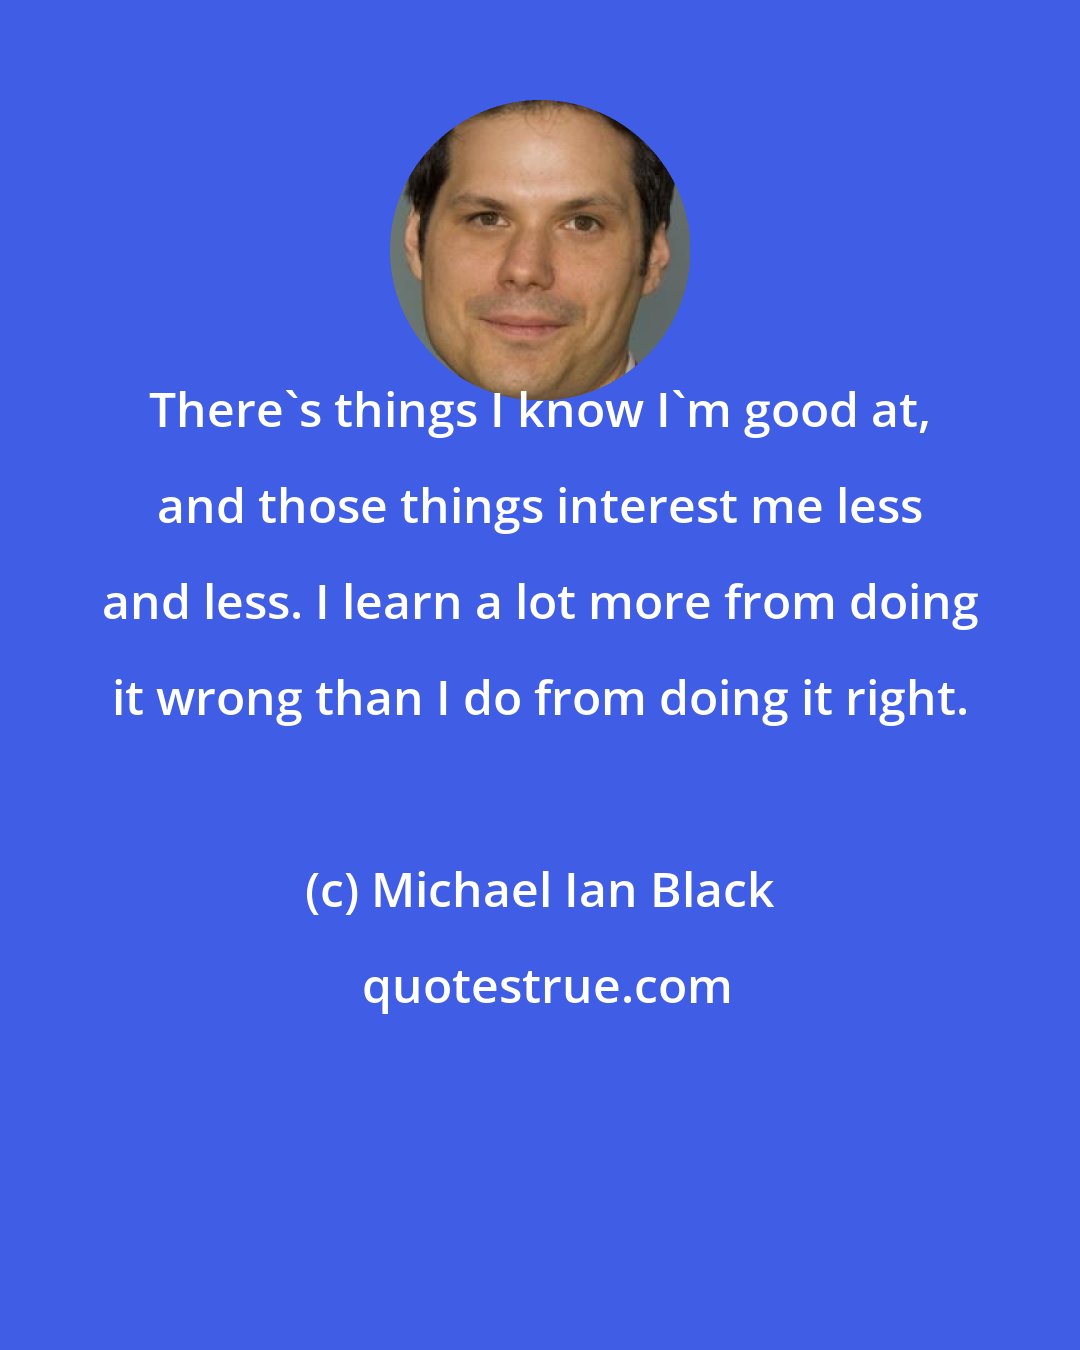 Michael Ian Black: There's things I know I'm good at, and those things interest me less and less. I learn a lot more from doing it wrong than I do from doing it right.